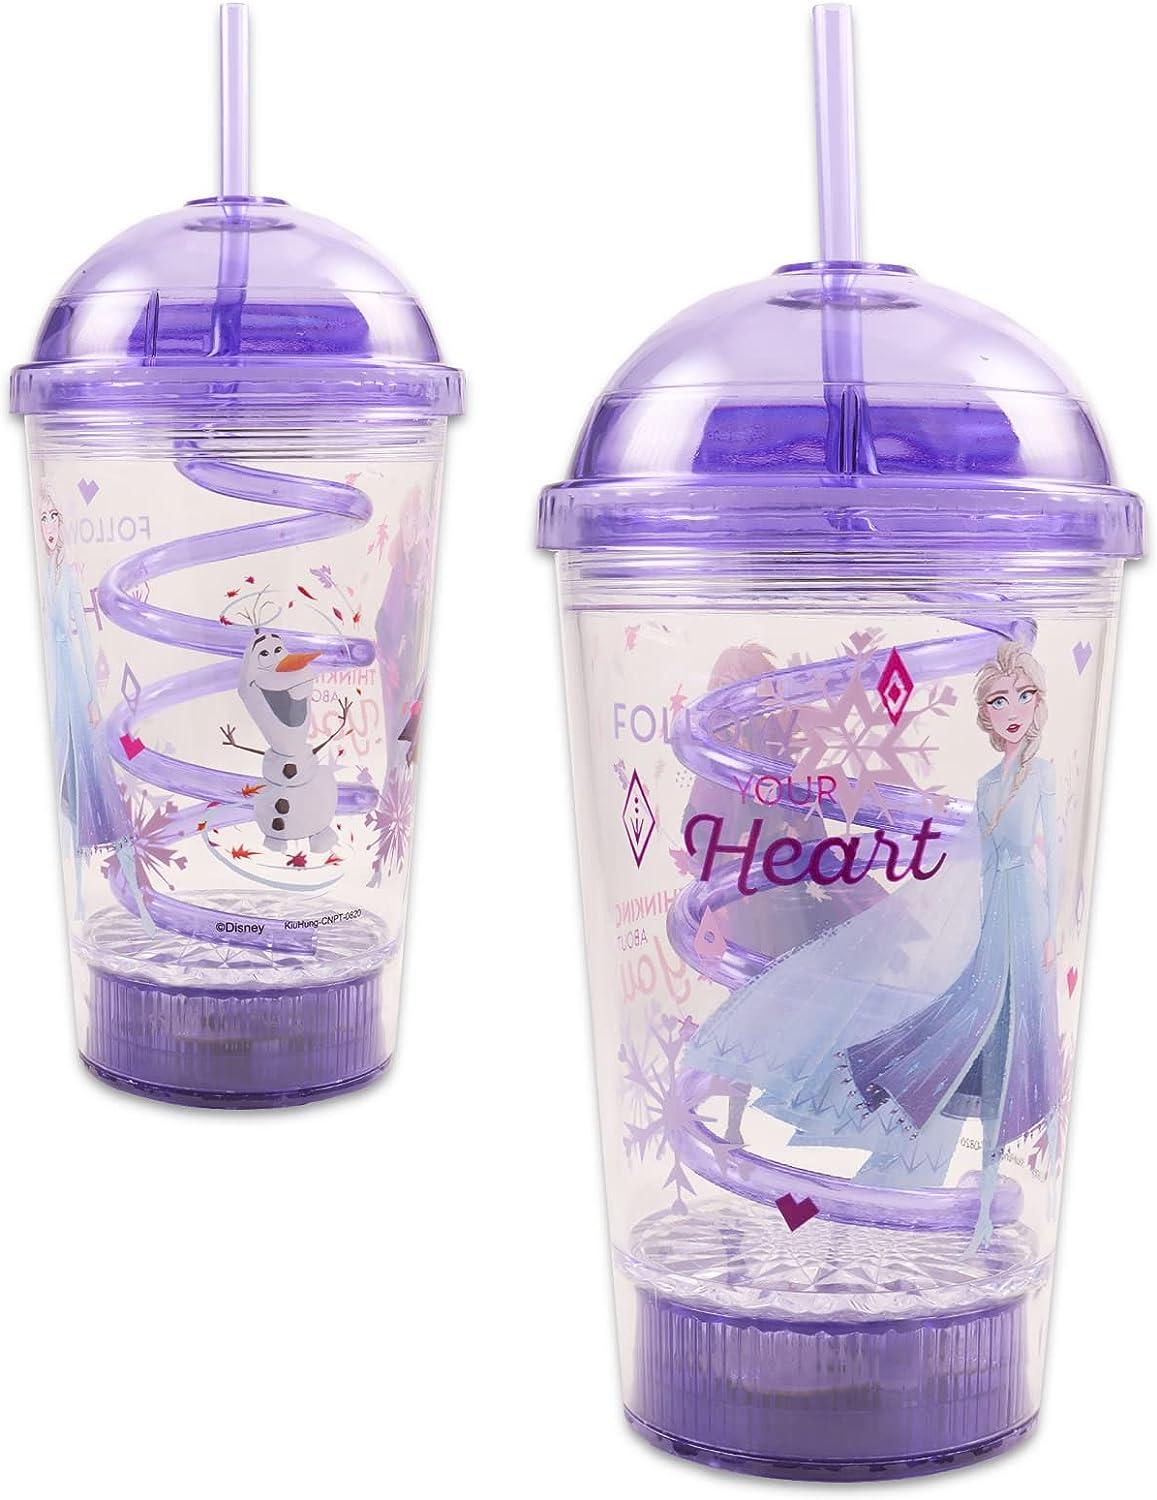 470ml Disney Frozen Children's Cup with A Straw Fall Portable